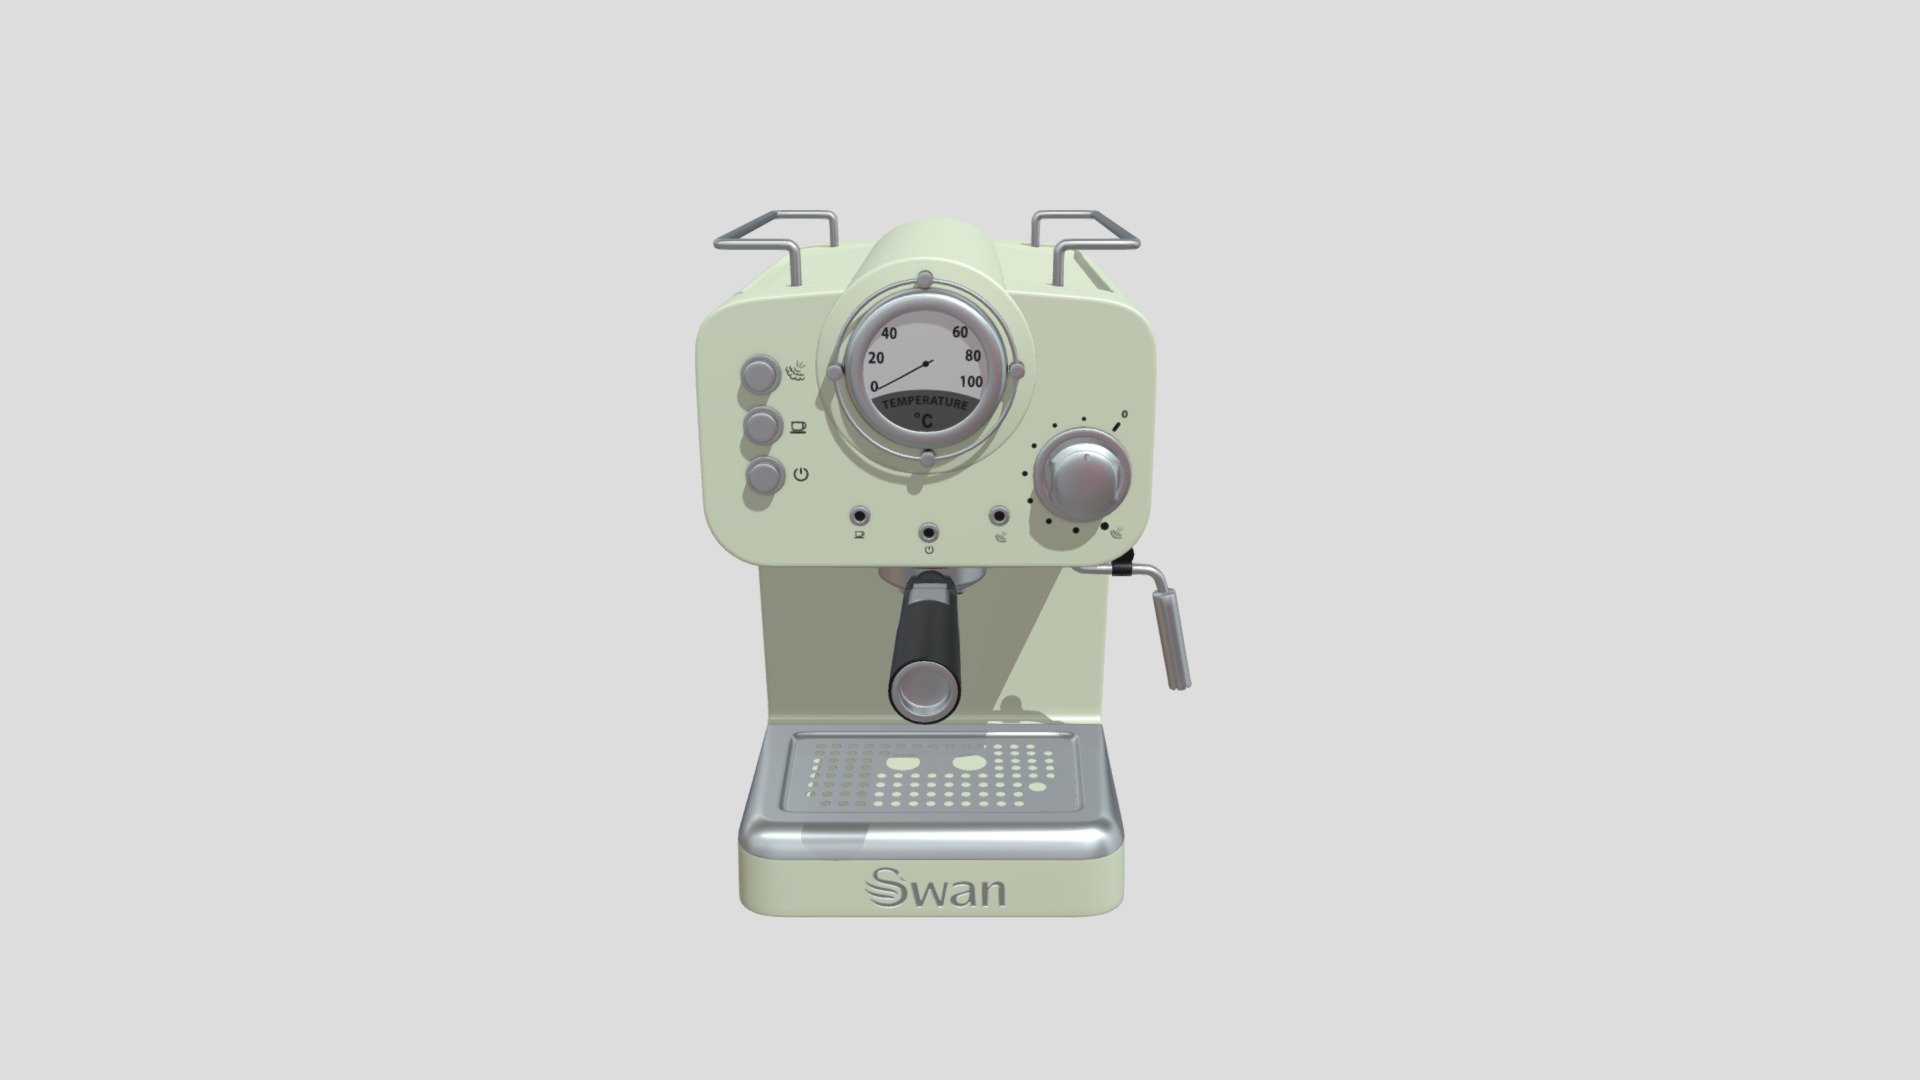 Capacity    1.2 litres
Brand   Swan
Colour  Green
Special feature Steam pressure control, Detachable water tank, 2 cups at once, 15 bars of pressure
Coffee maker type   Espresso Machine - Swan Retro Pump Espresso Coffee Machine - 3D model by kamrul_hasan 3d model